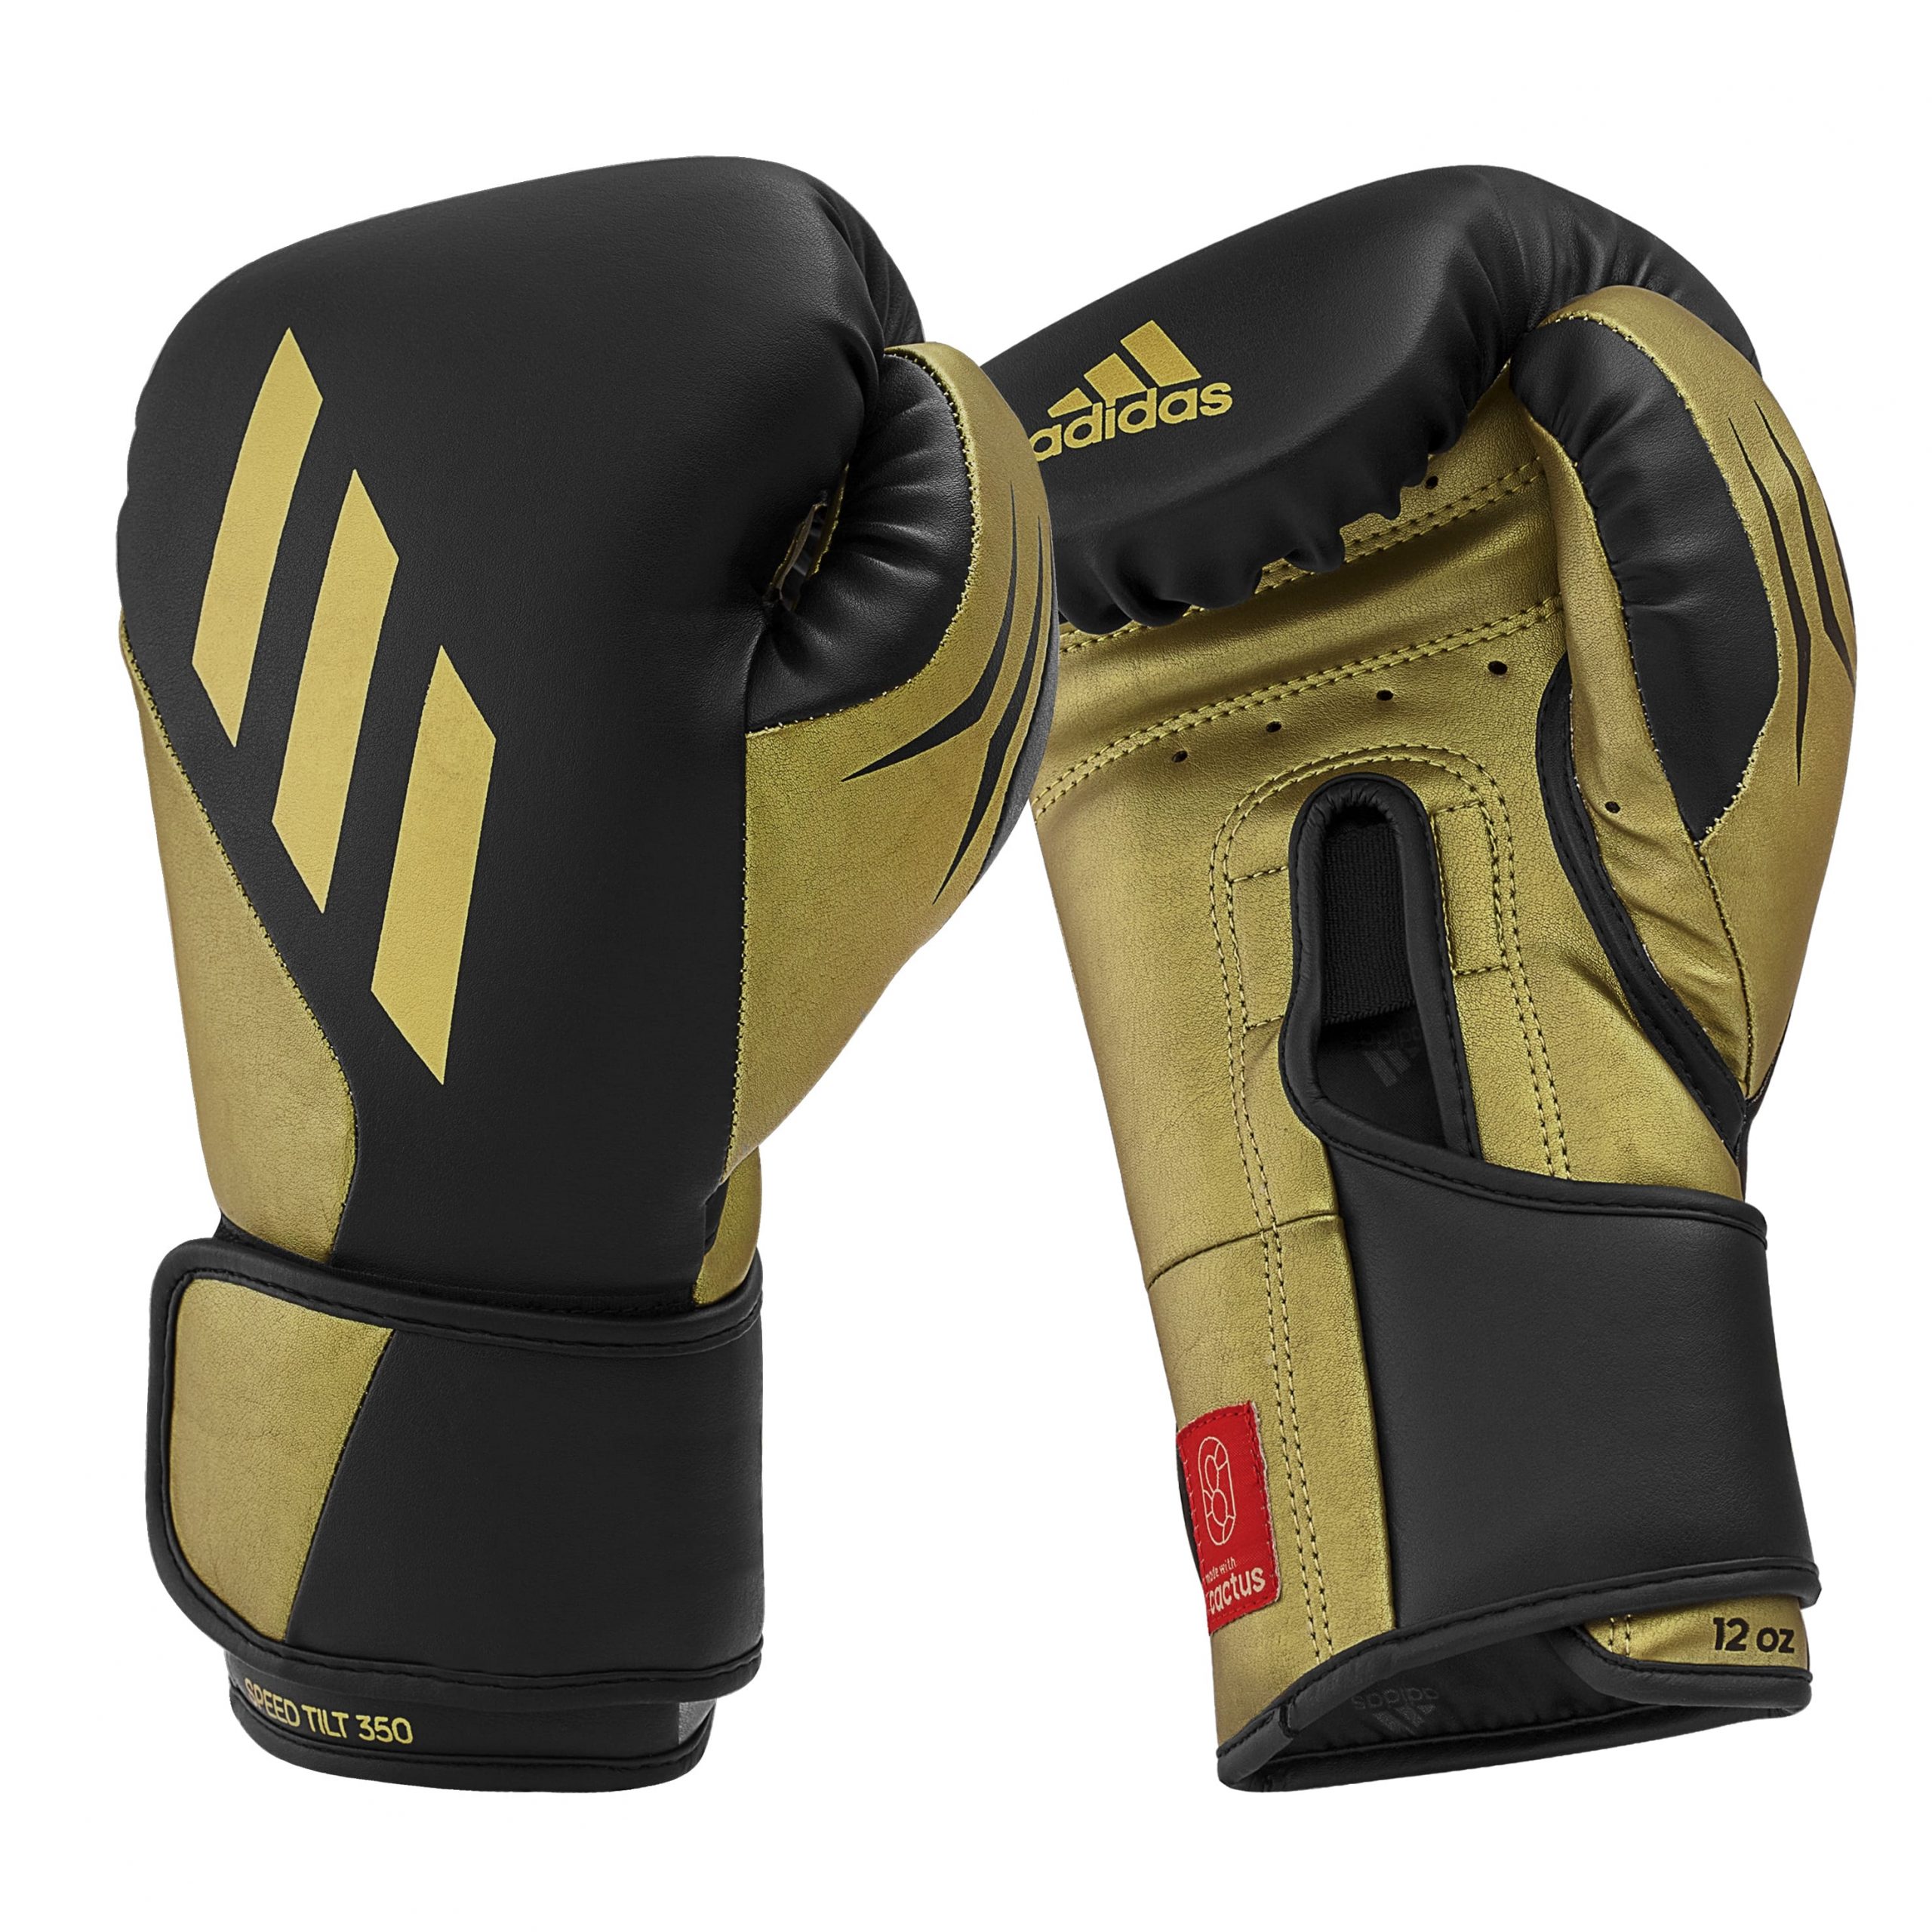 RAA Karate Mitts Boxing Fist Inner Gloves MMA Grappling Sparring Mitt Glove New